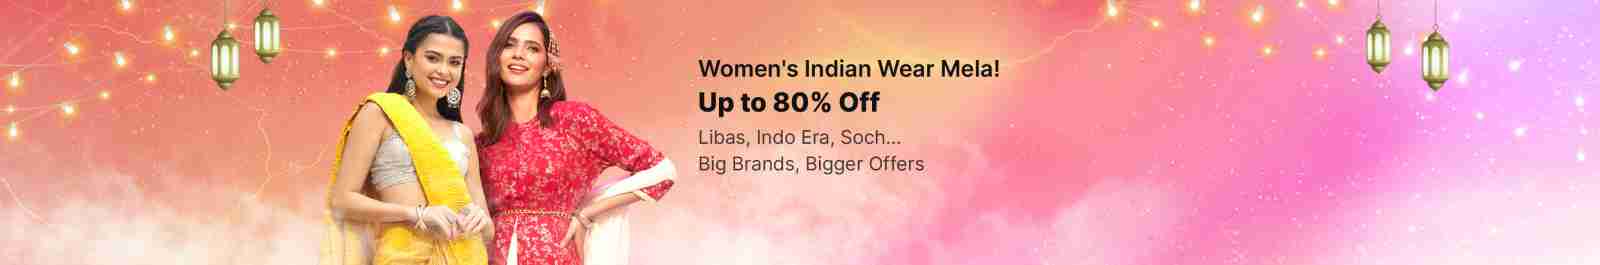 Get Set Glam: Myntra Beauty Bash is bringing jaw-dropping offers on the  best of beauty and personal care for you! - Times of India